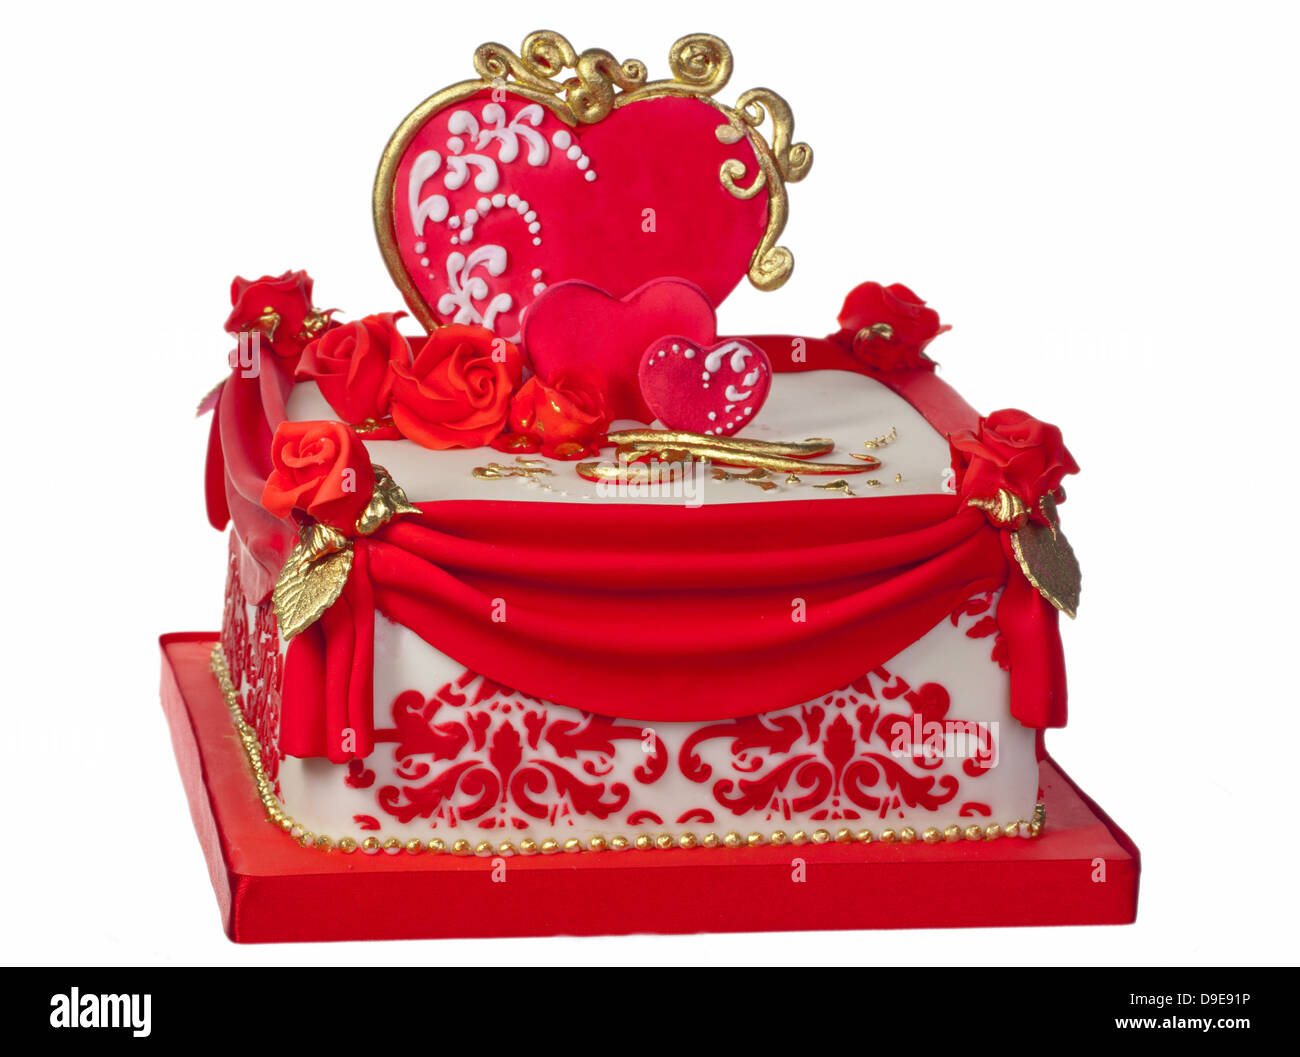 Celebration iced cake in red, white and gold  decorated with hearts and roses. Stock Photo